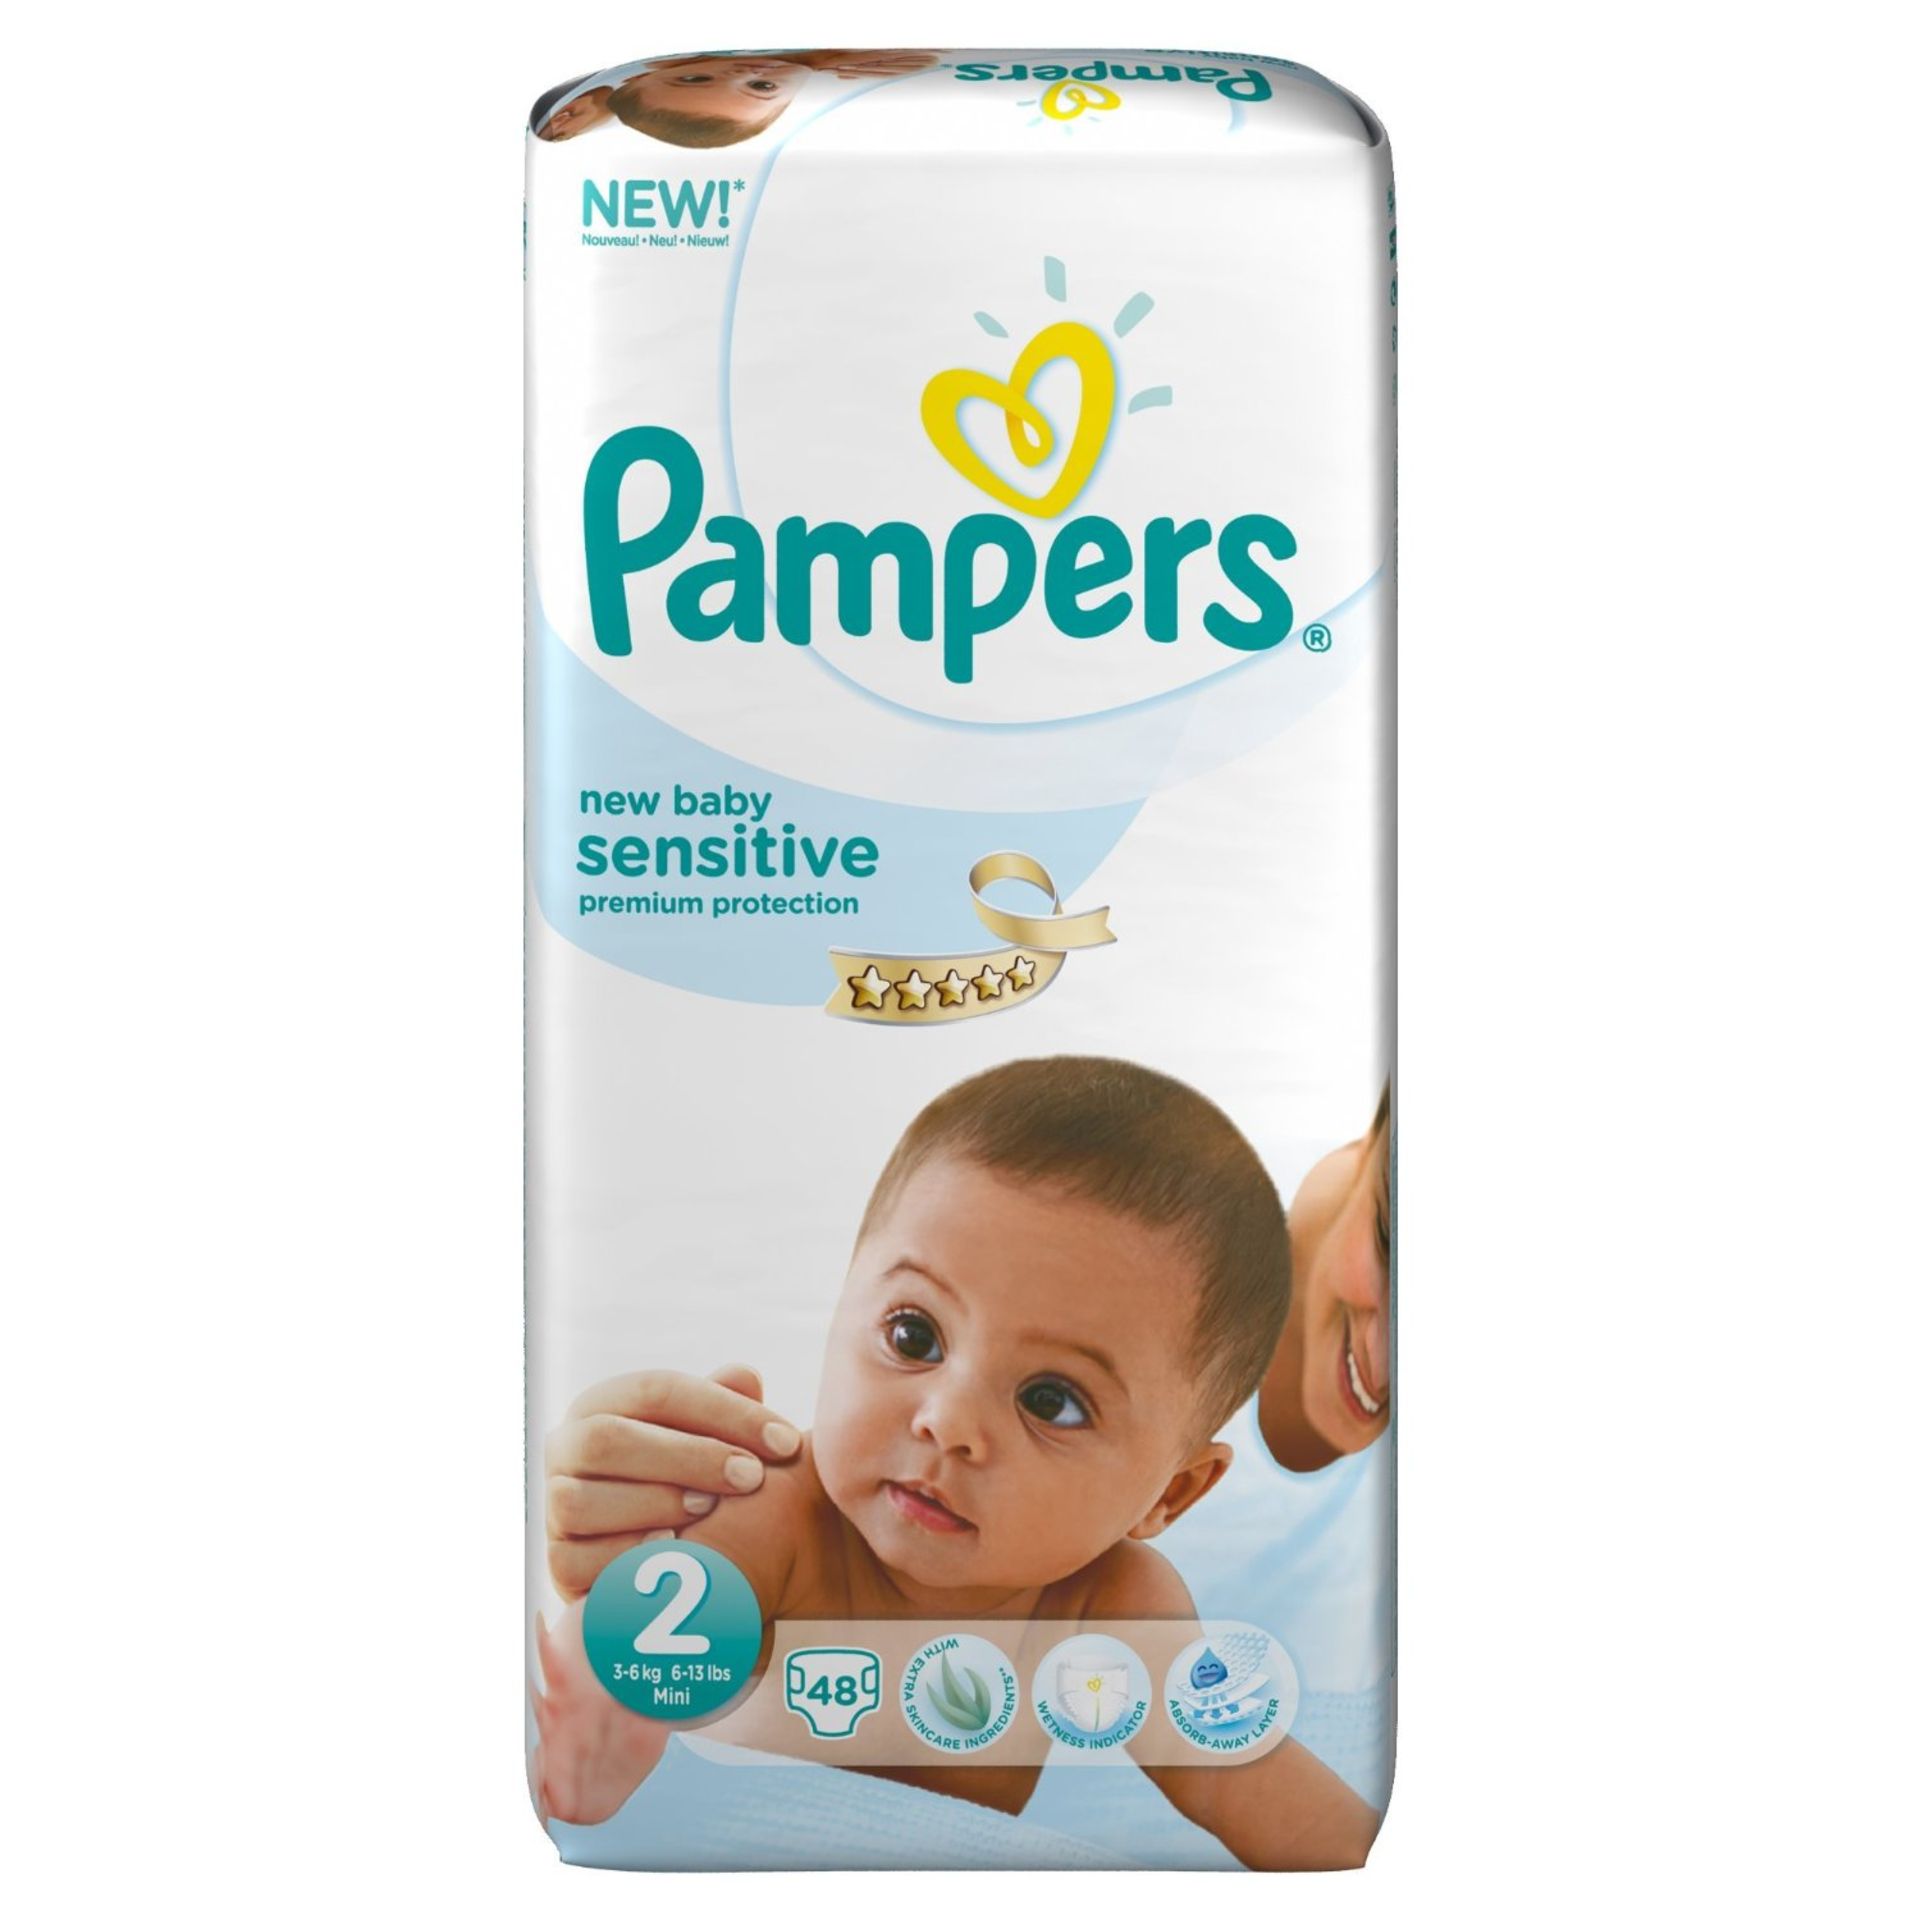 1 Box of 5 units , Containing Baby Products - Box Number 'BABY 240' - Latest AMZ price £77.3 - - Image 2 of 4